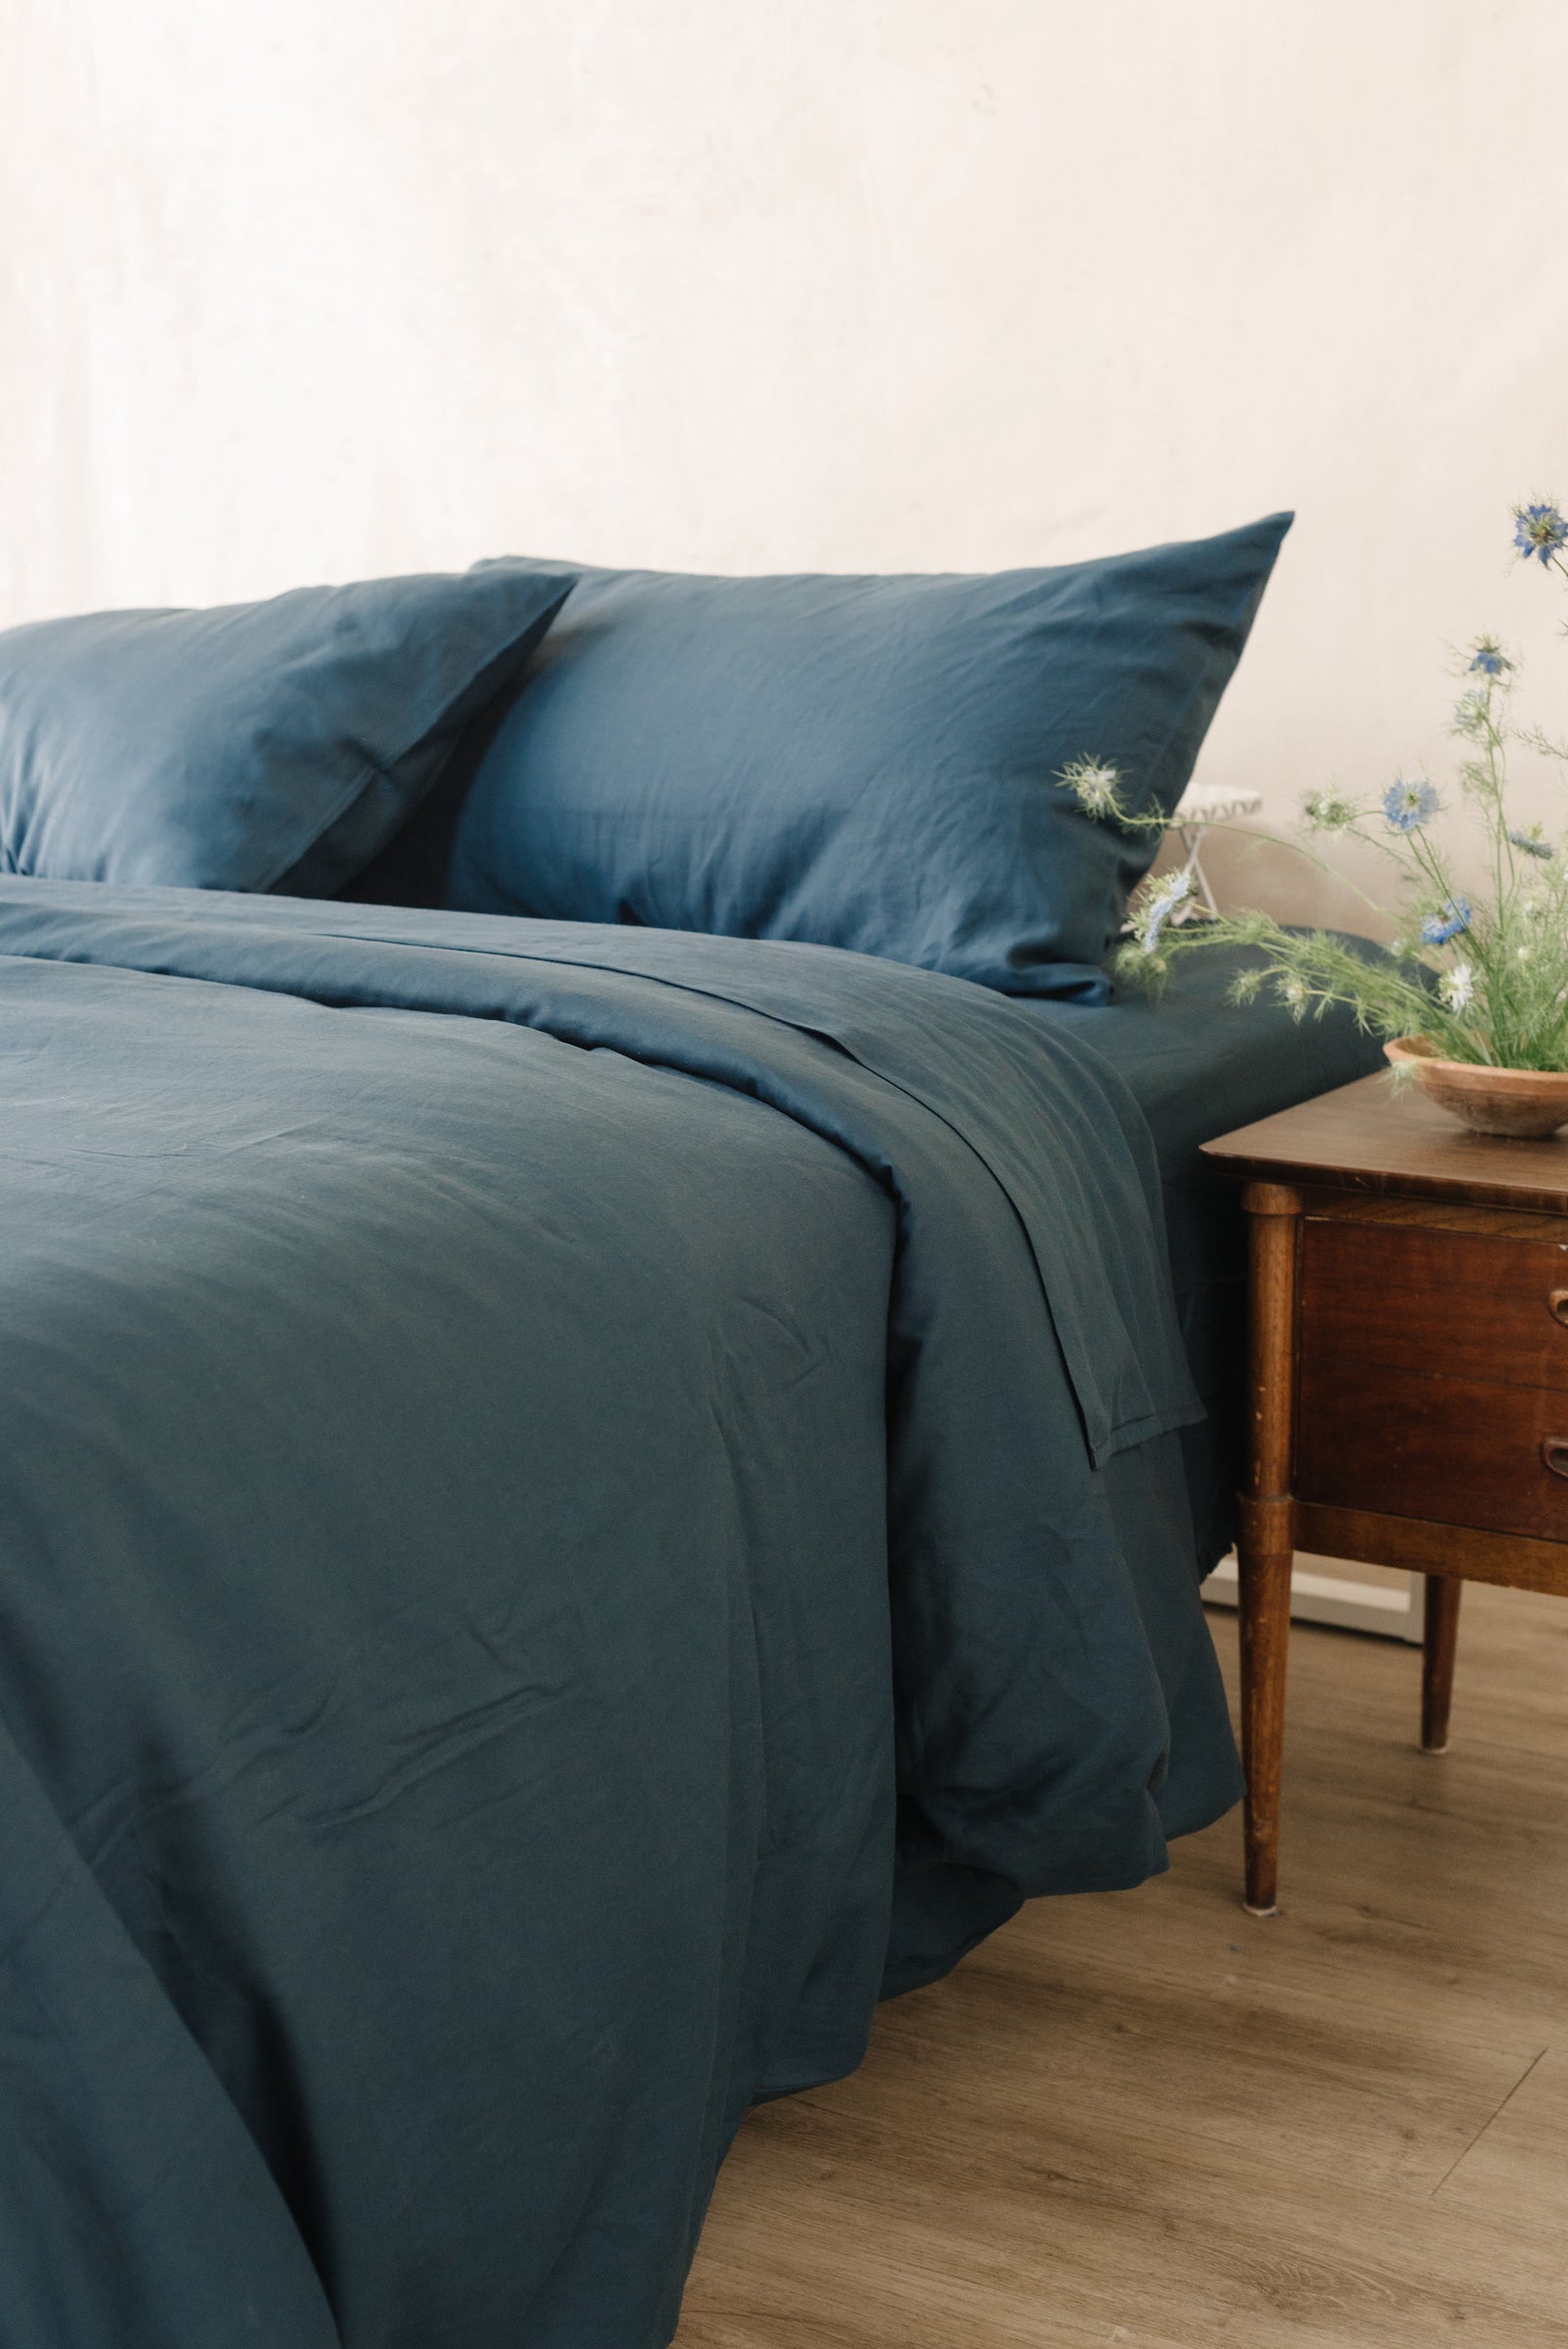 Navy Duvet Cover and comforter resting on a bed. 